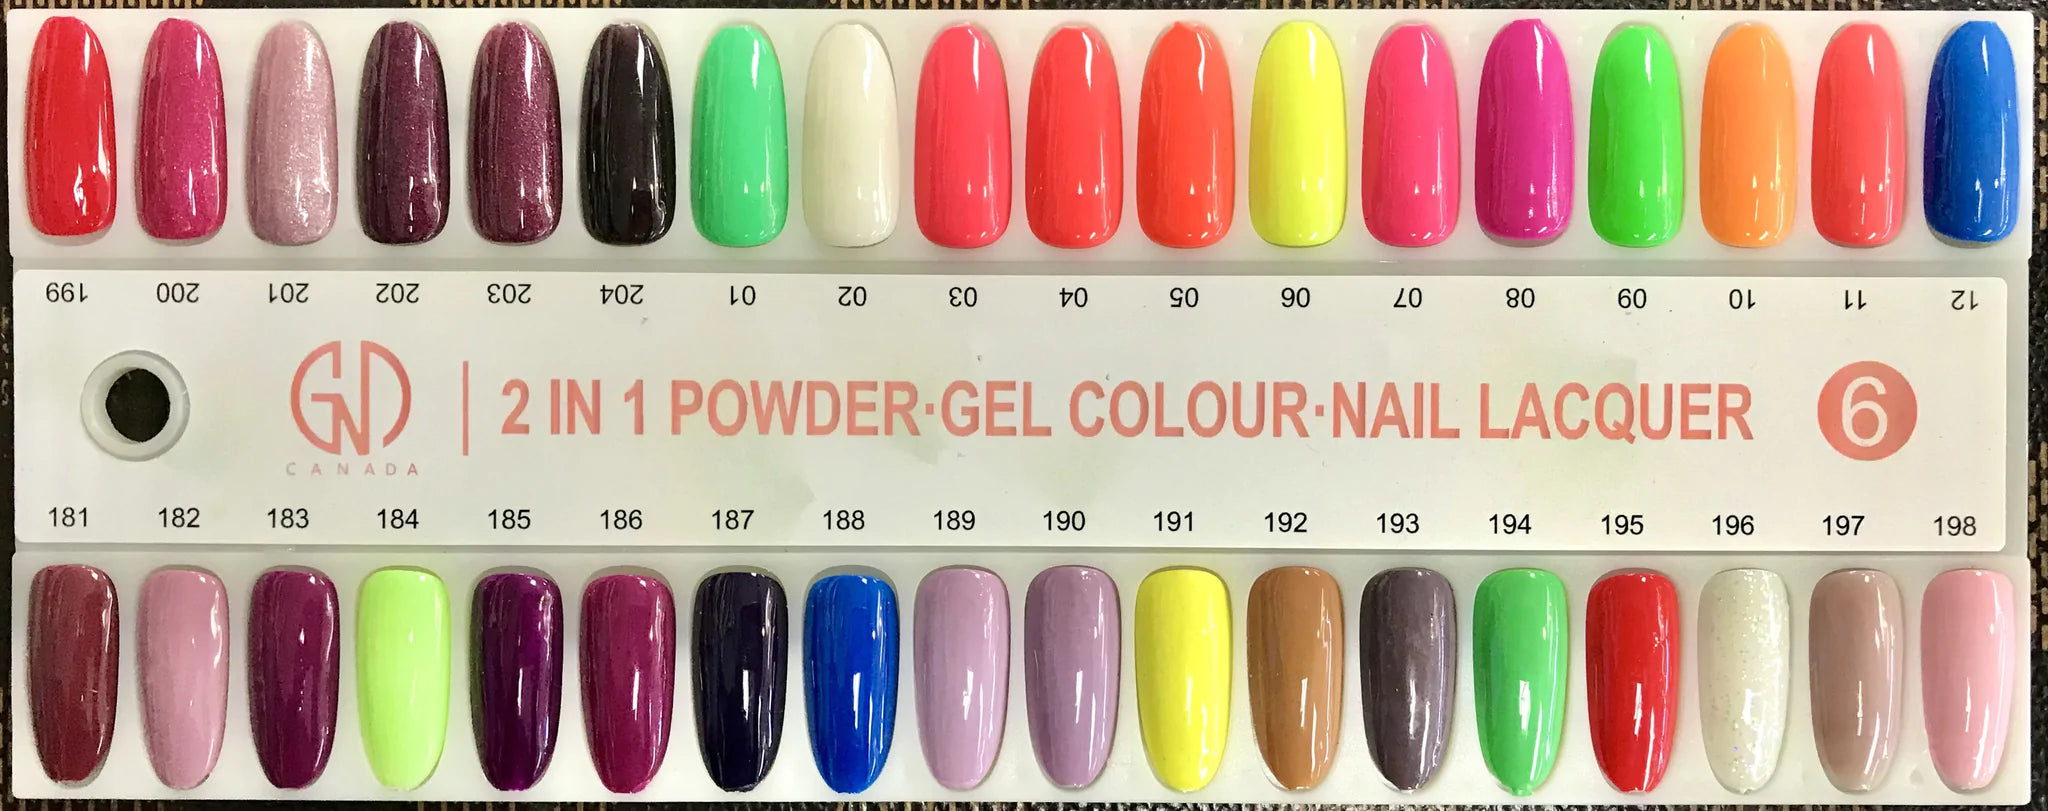 GND Duo Gel & Lacquer 187